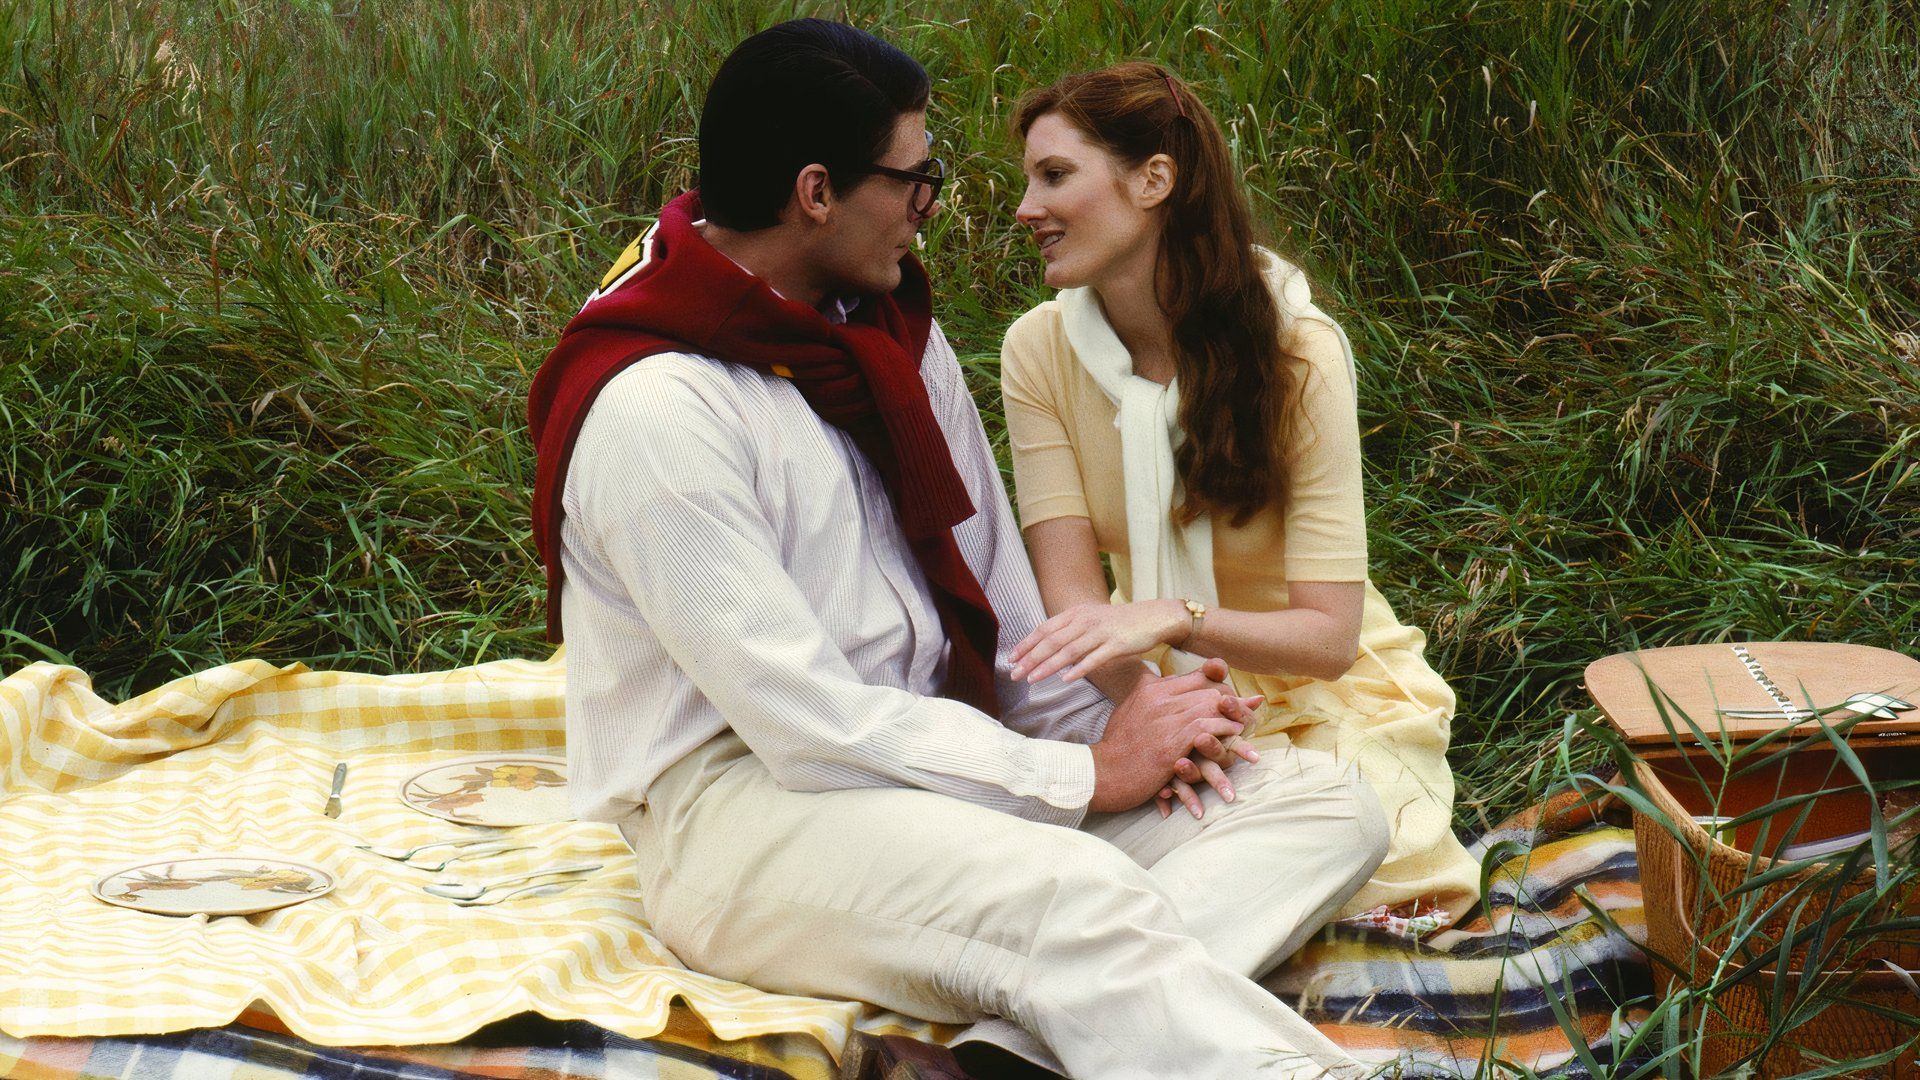 Christopher Reeve as Superman / Clark Kent with Lana Lang, played by Annette O'Toole in Superman 3